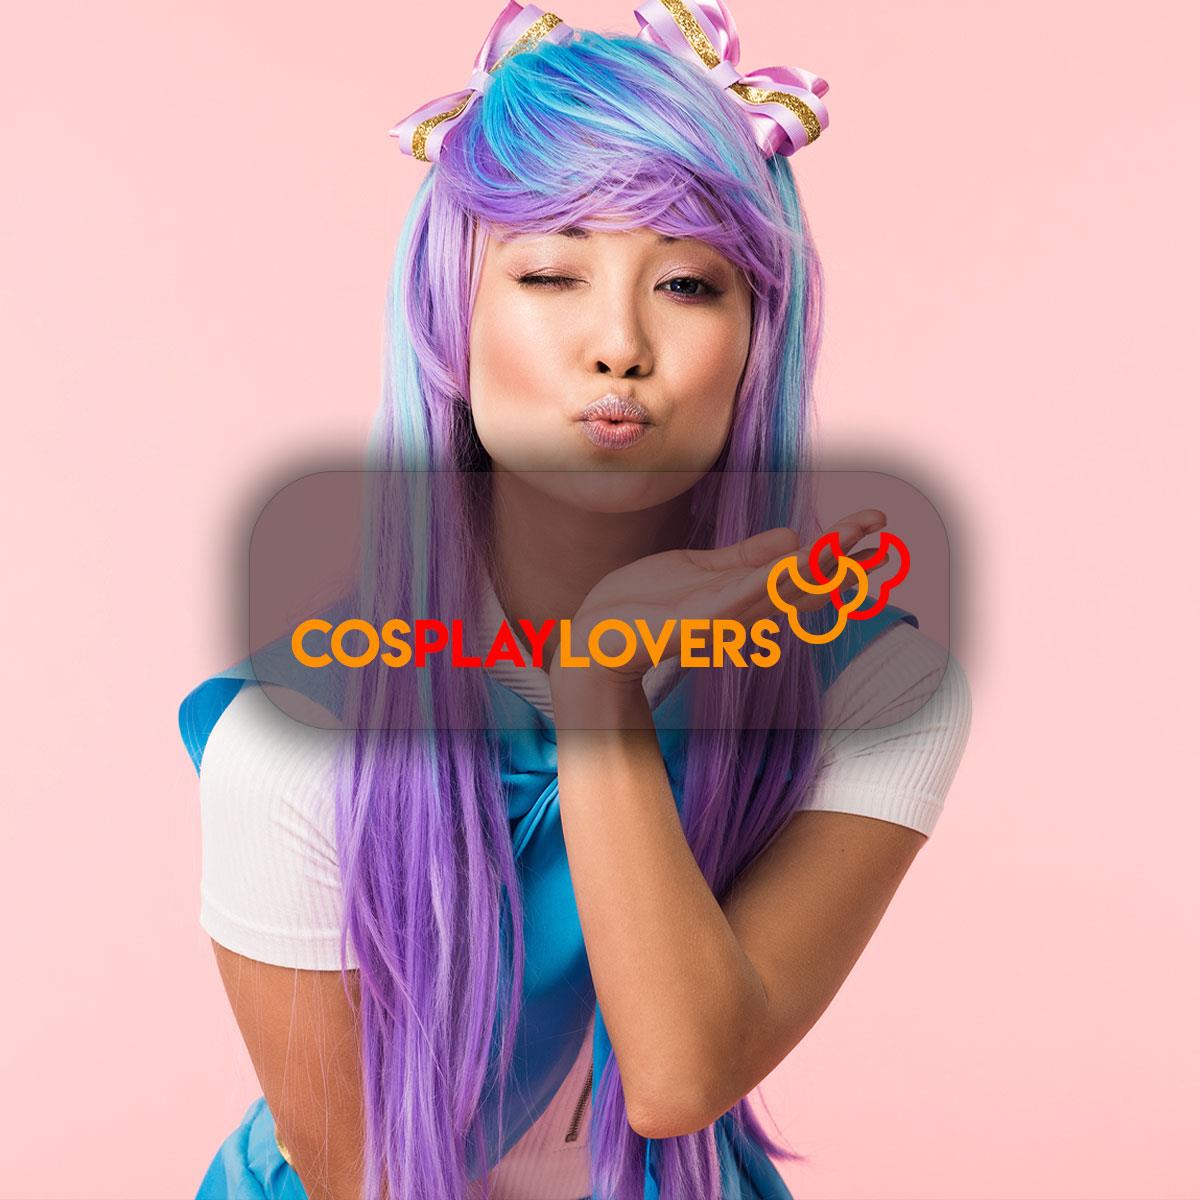 CosplayLover